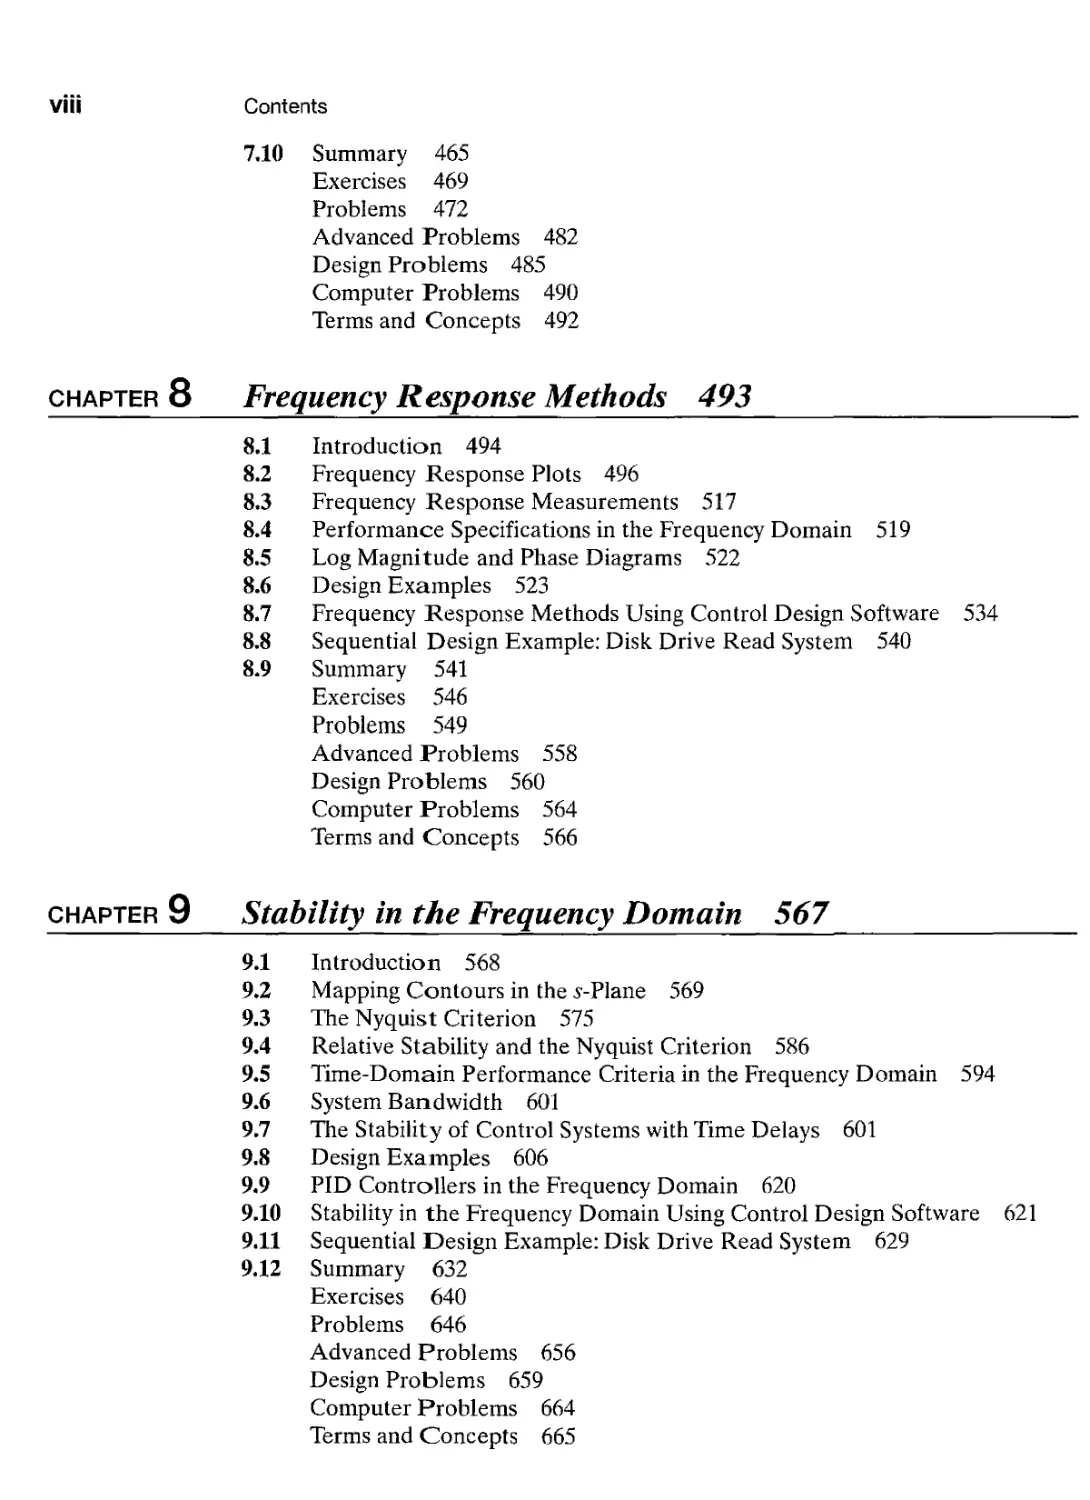 8 Frequency Response Methods
9 Stability in the Frequency Domain